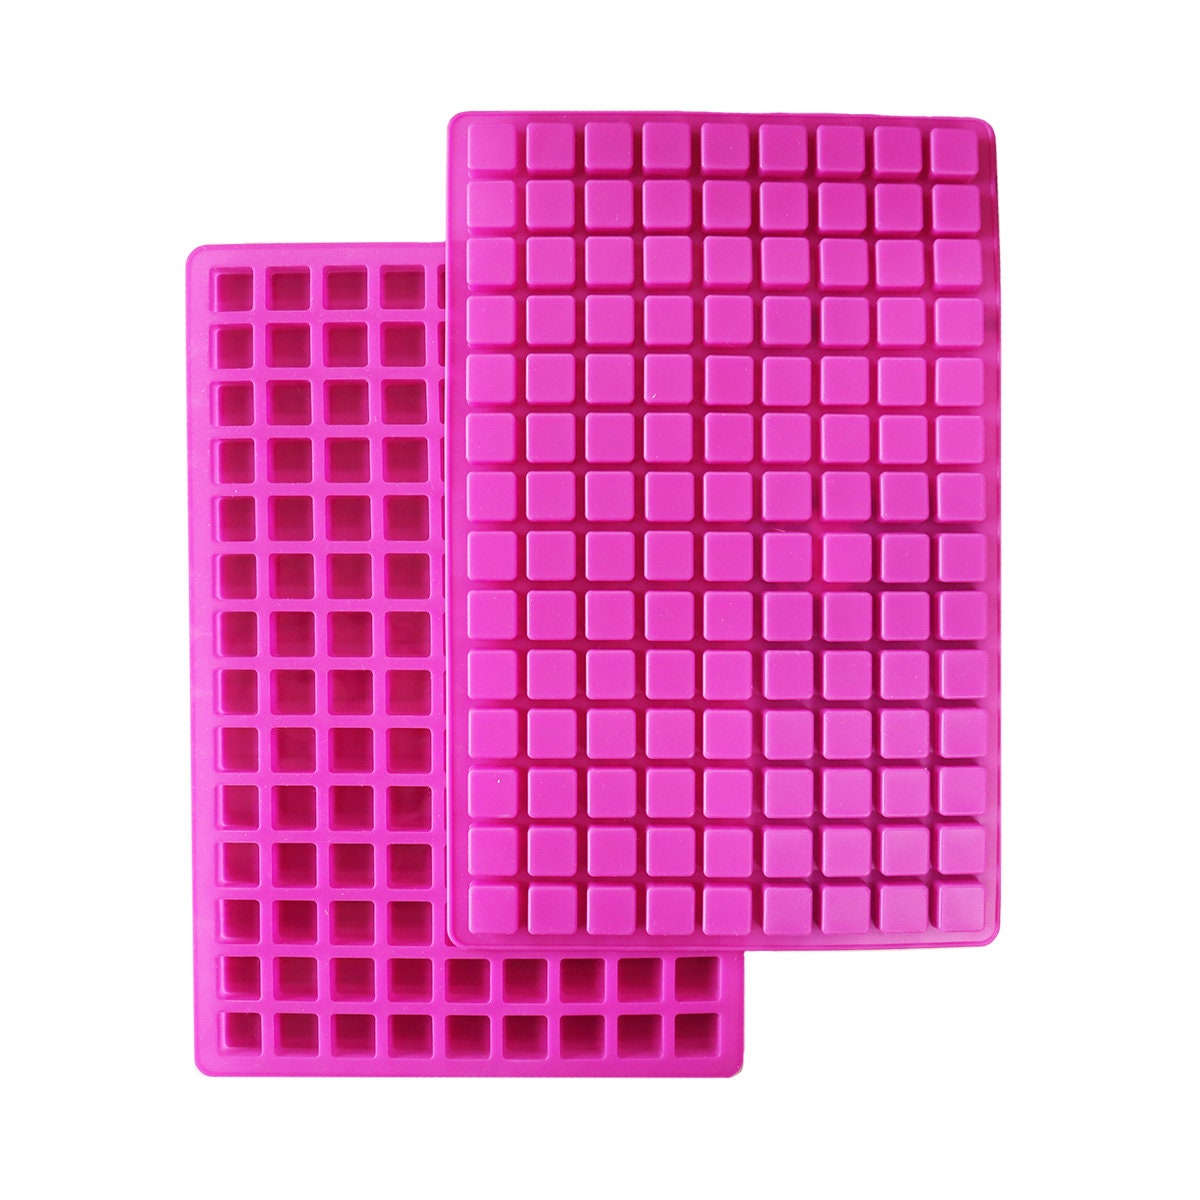 Funbaky Chocolate Silicone Molds - Square Candy Molds for Caramel, Gummy,  Ice Cube (1)